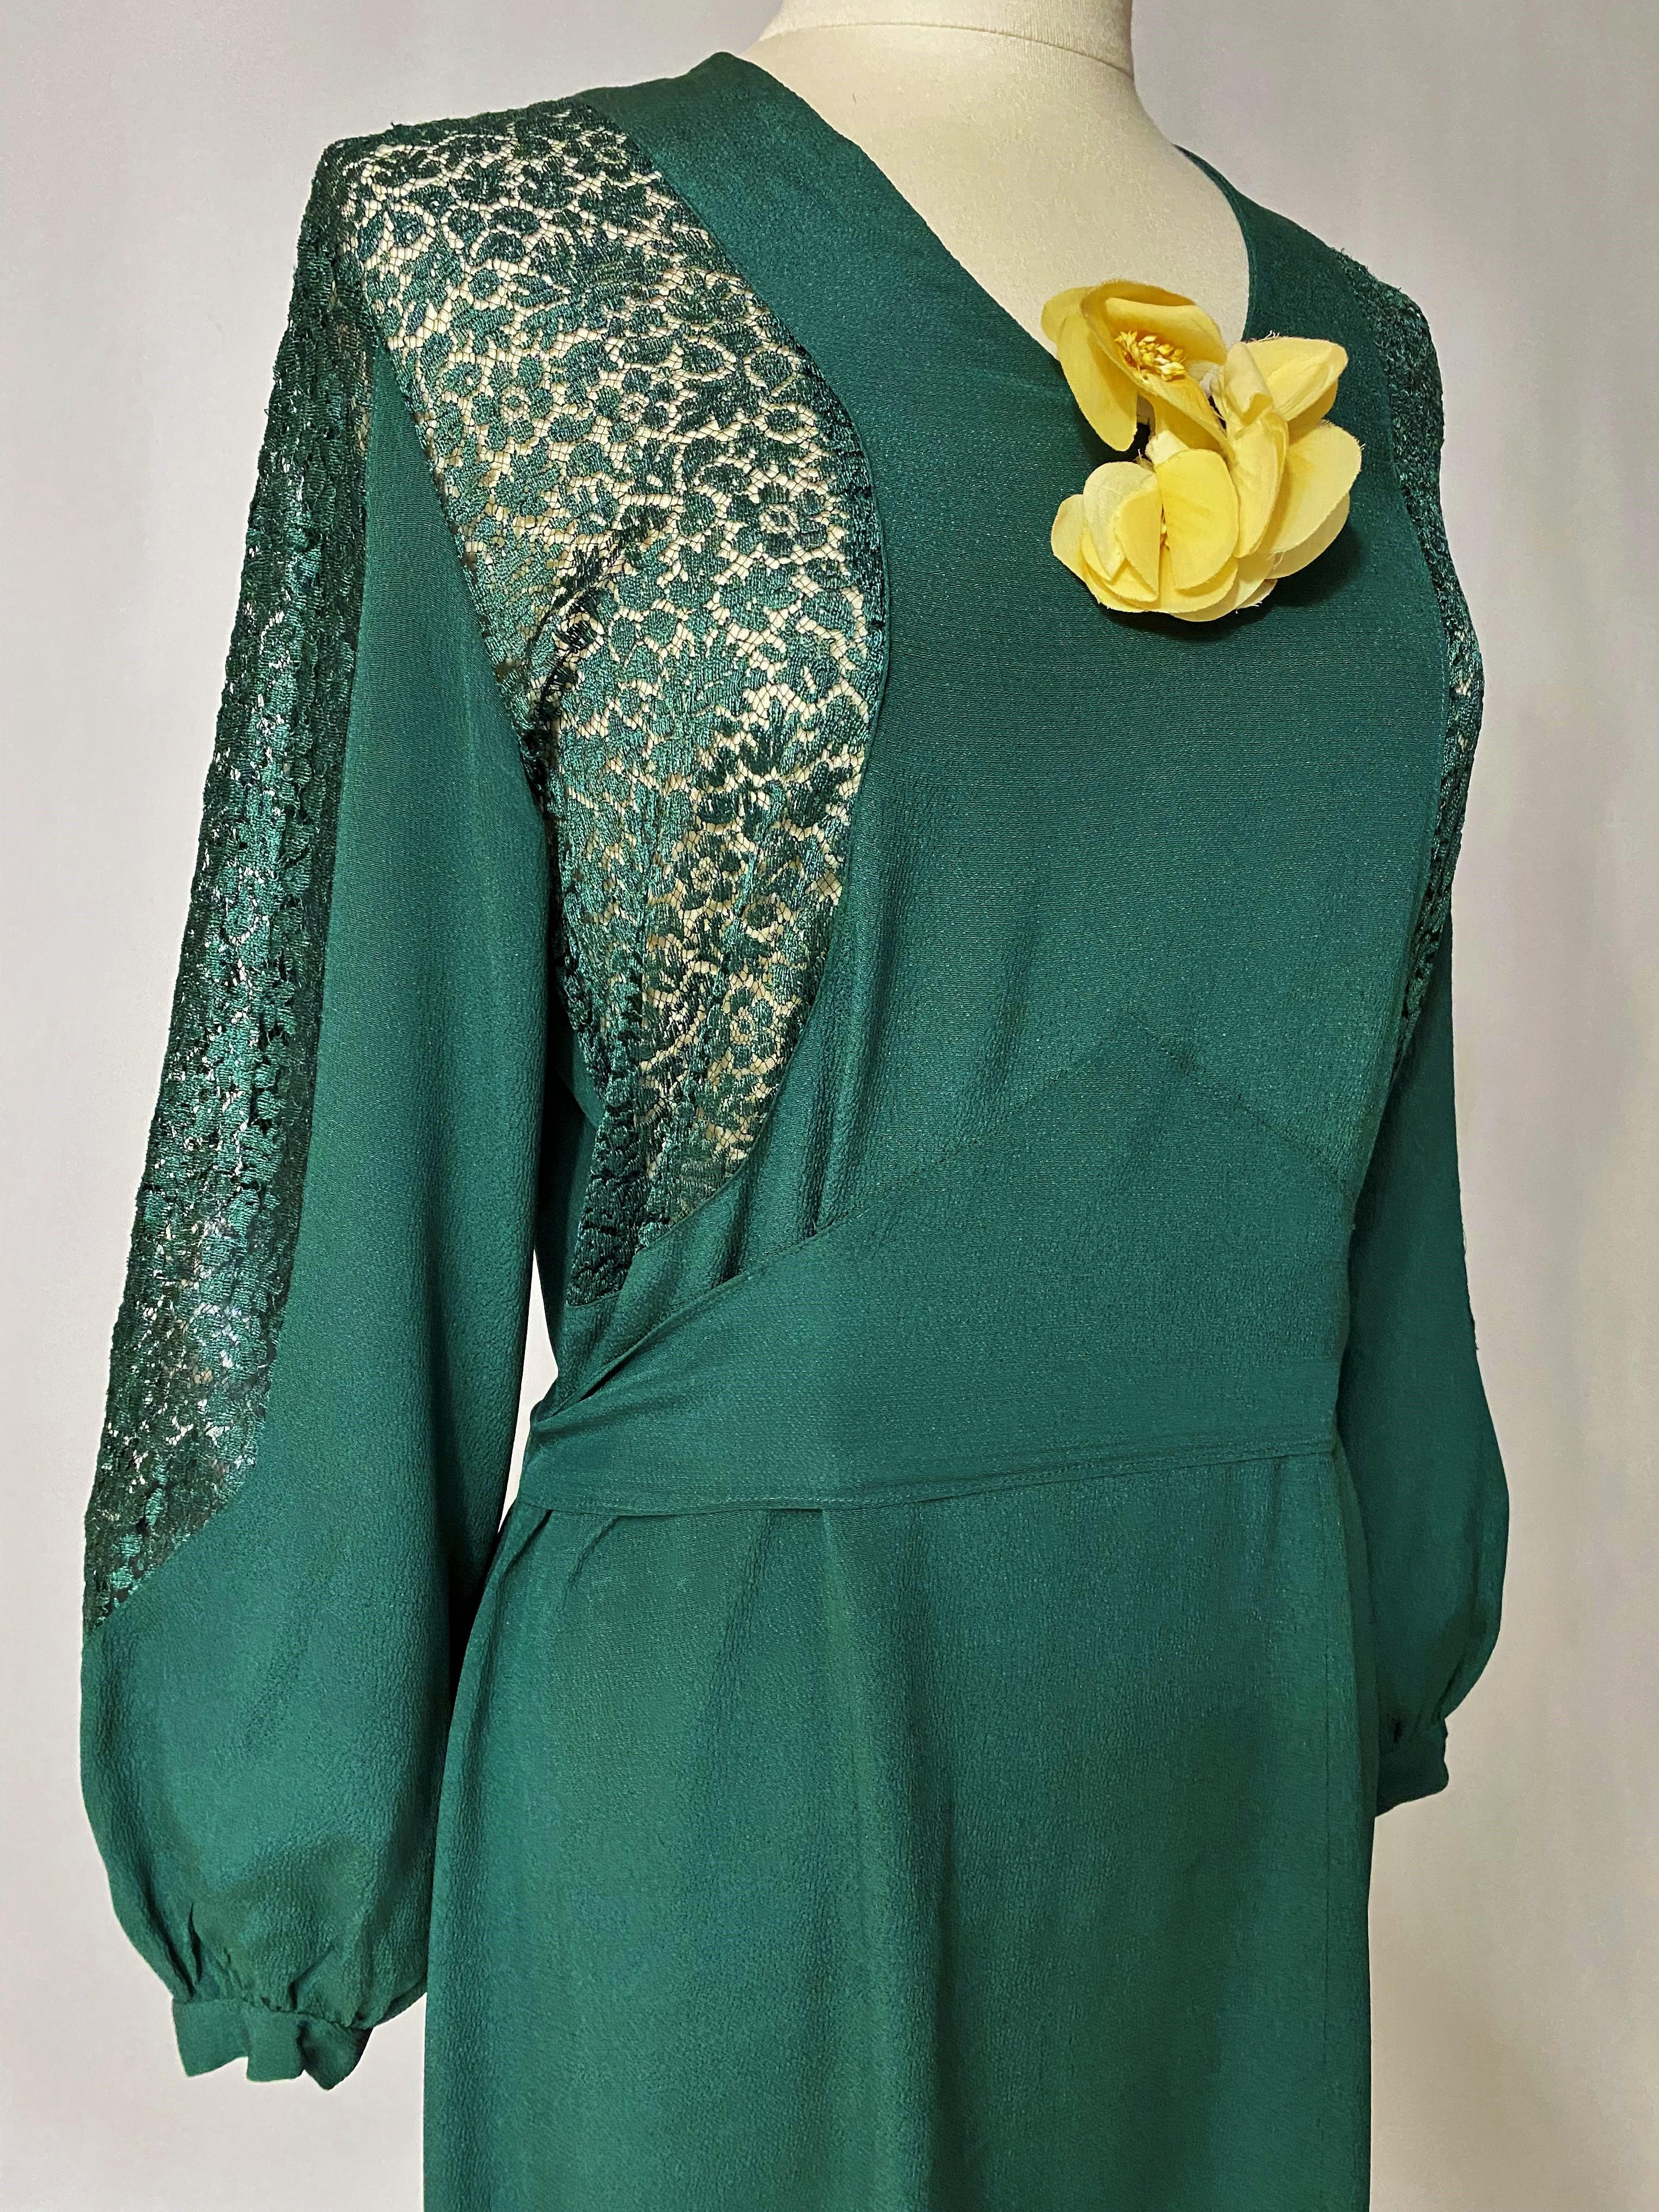 Circa 1935-1945

France

Emerald green crepe evening dress with lace inserts dating from the 1940s. Long dress with puffed sleeves and bib effect. V-shaped applied belt underlines the bustier and is tied behind. Iced cotton flower on the chest (to